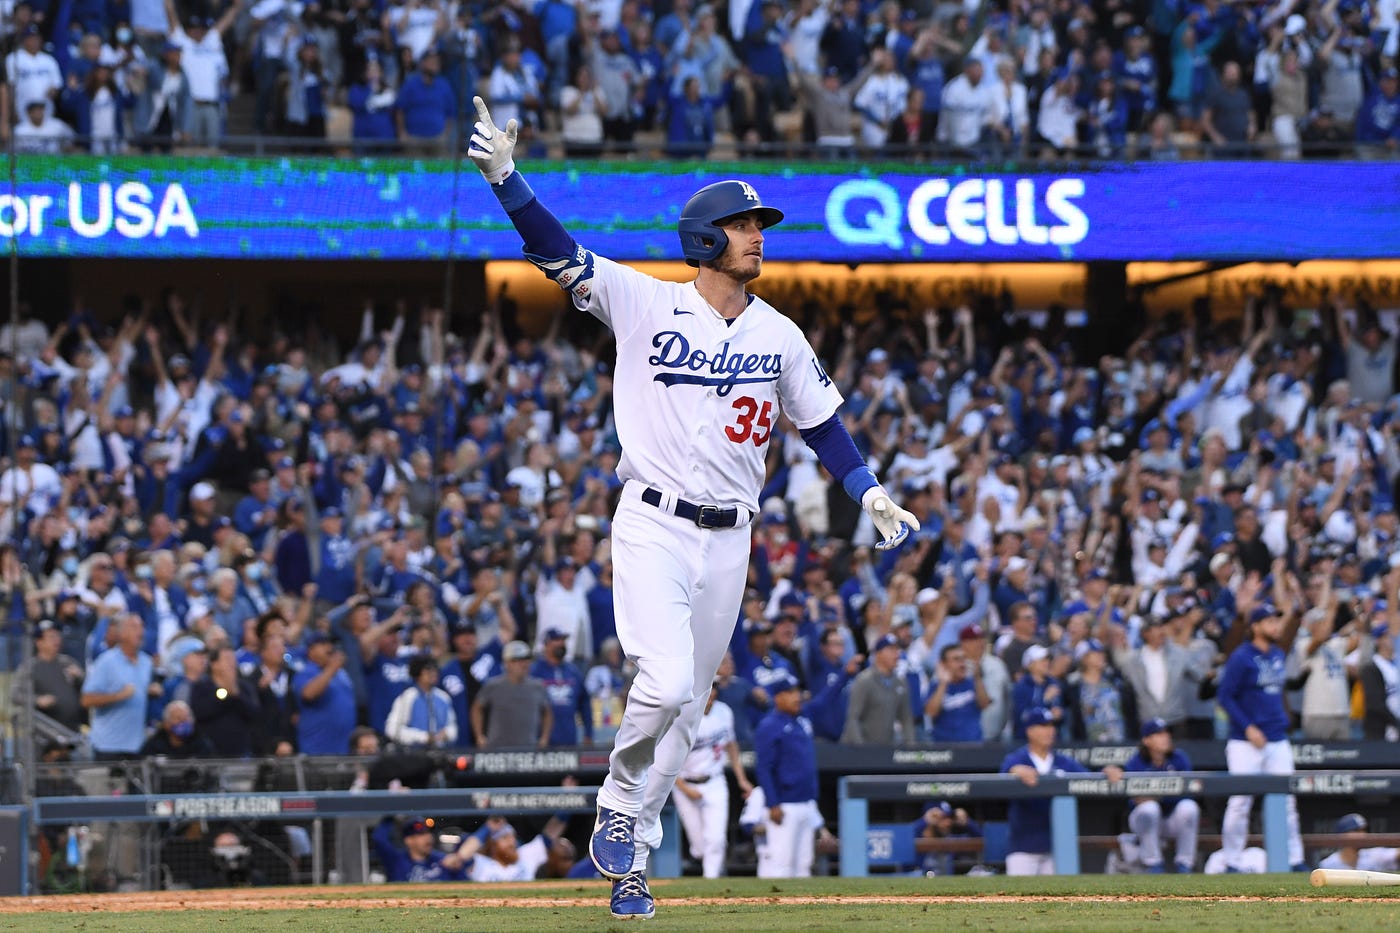 Cody Bellinger is now a dad of 2 daughters! Congrats on your new